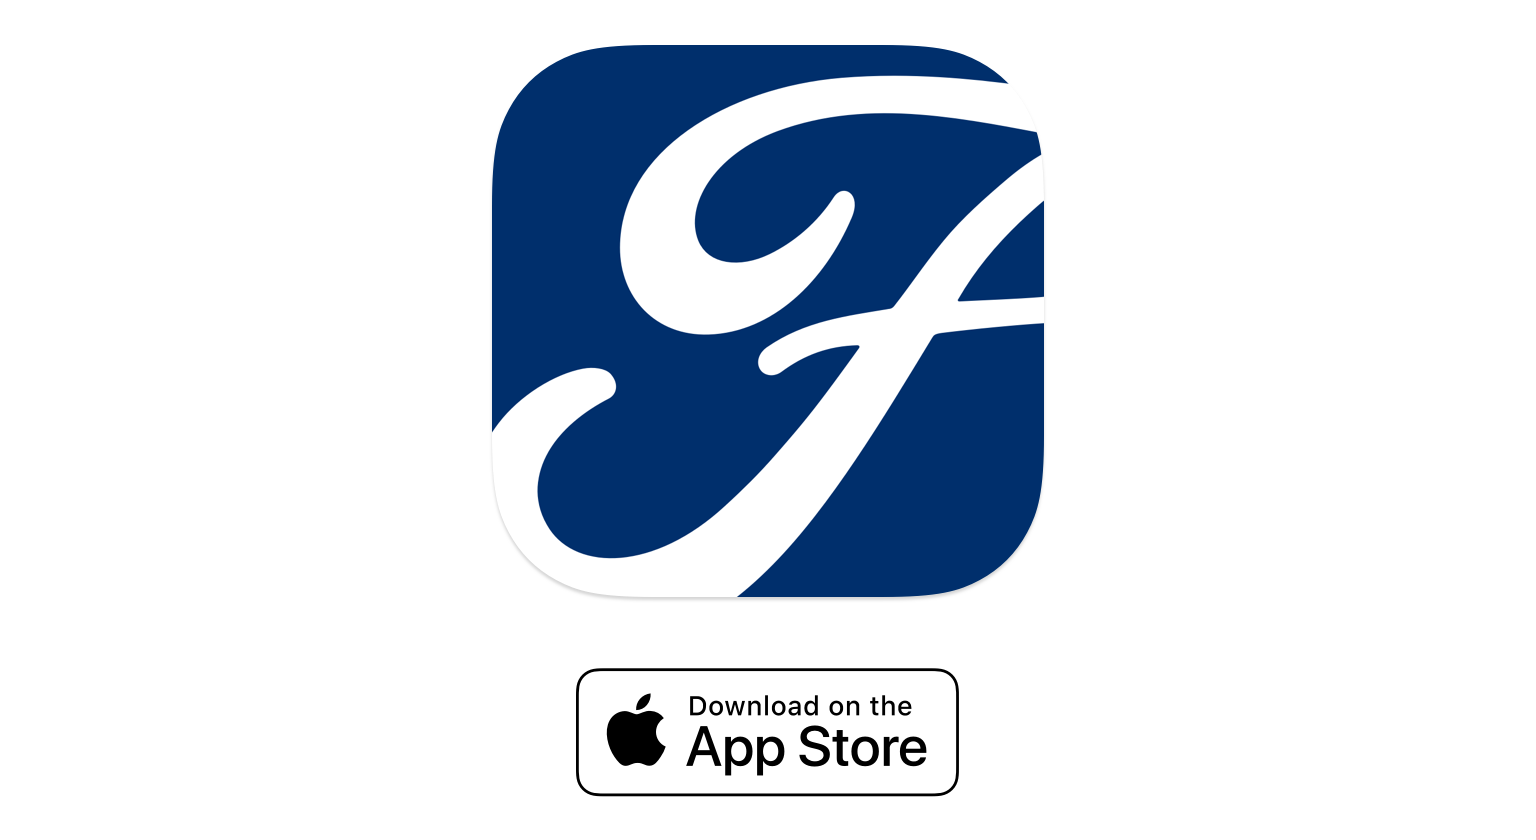 Download the FordPass app on the App Store